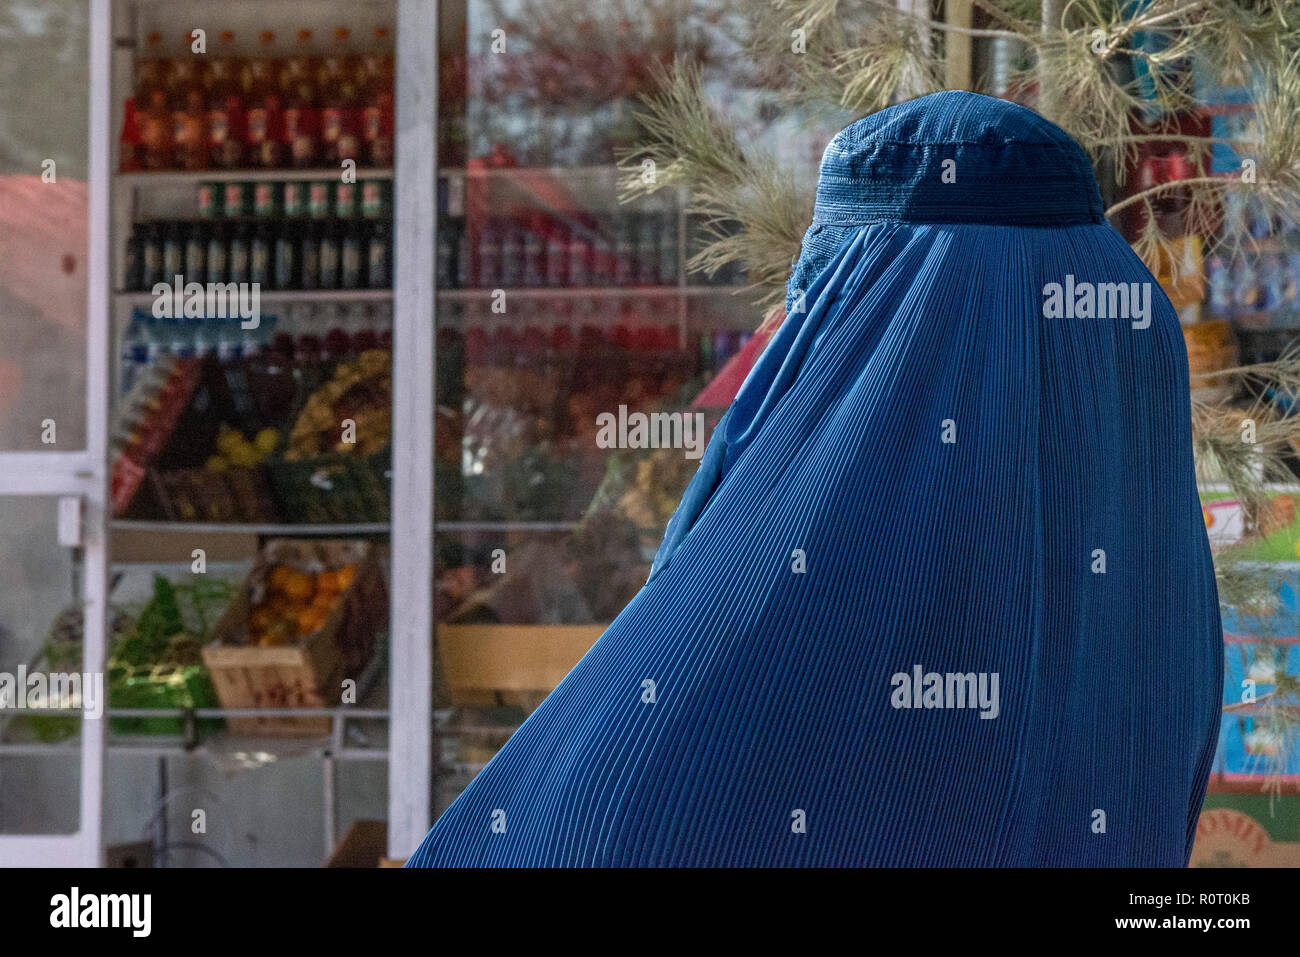 Woman Shopping With Traditional Burqa, Balkh Province, North Afghanistan Stock Photo